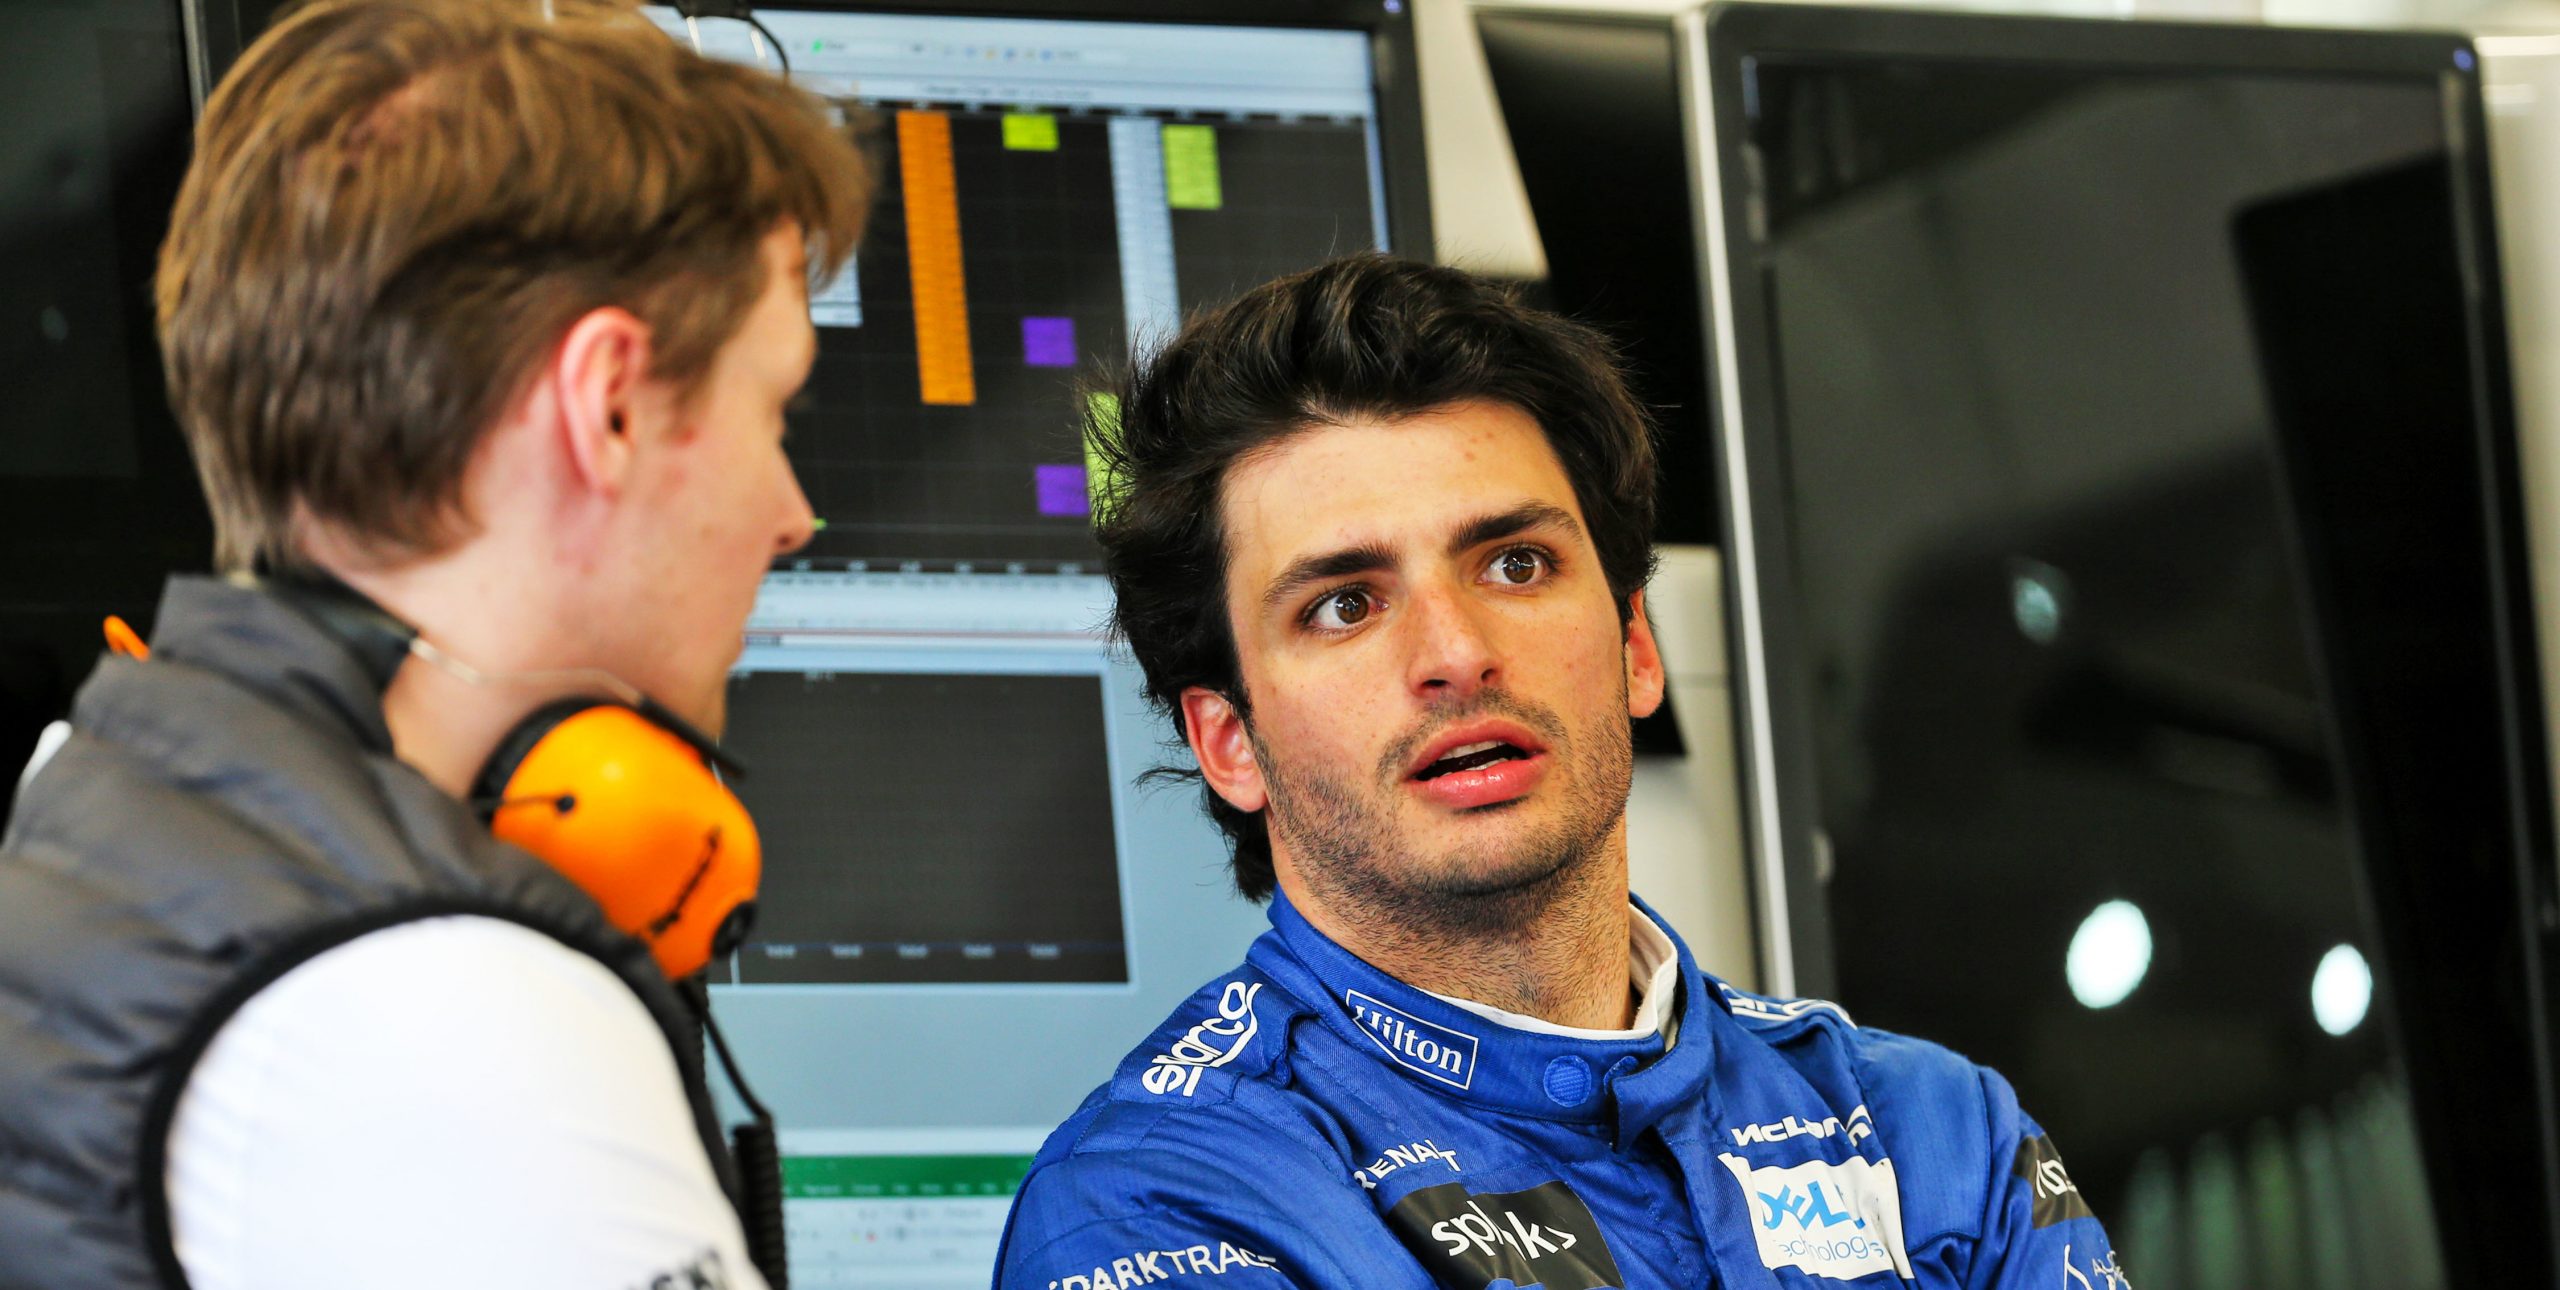 McLaren's Spanish driver Carles Sainz Junior could be one of the surprises this season